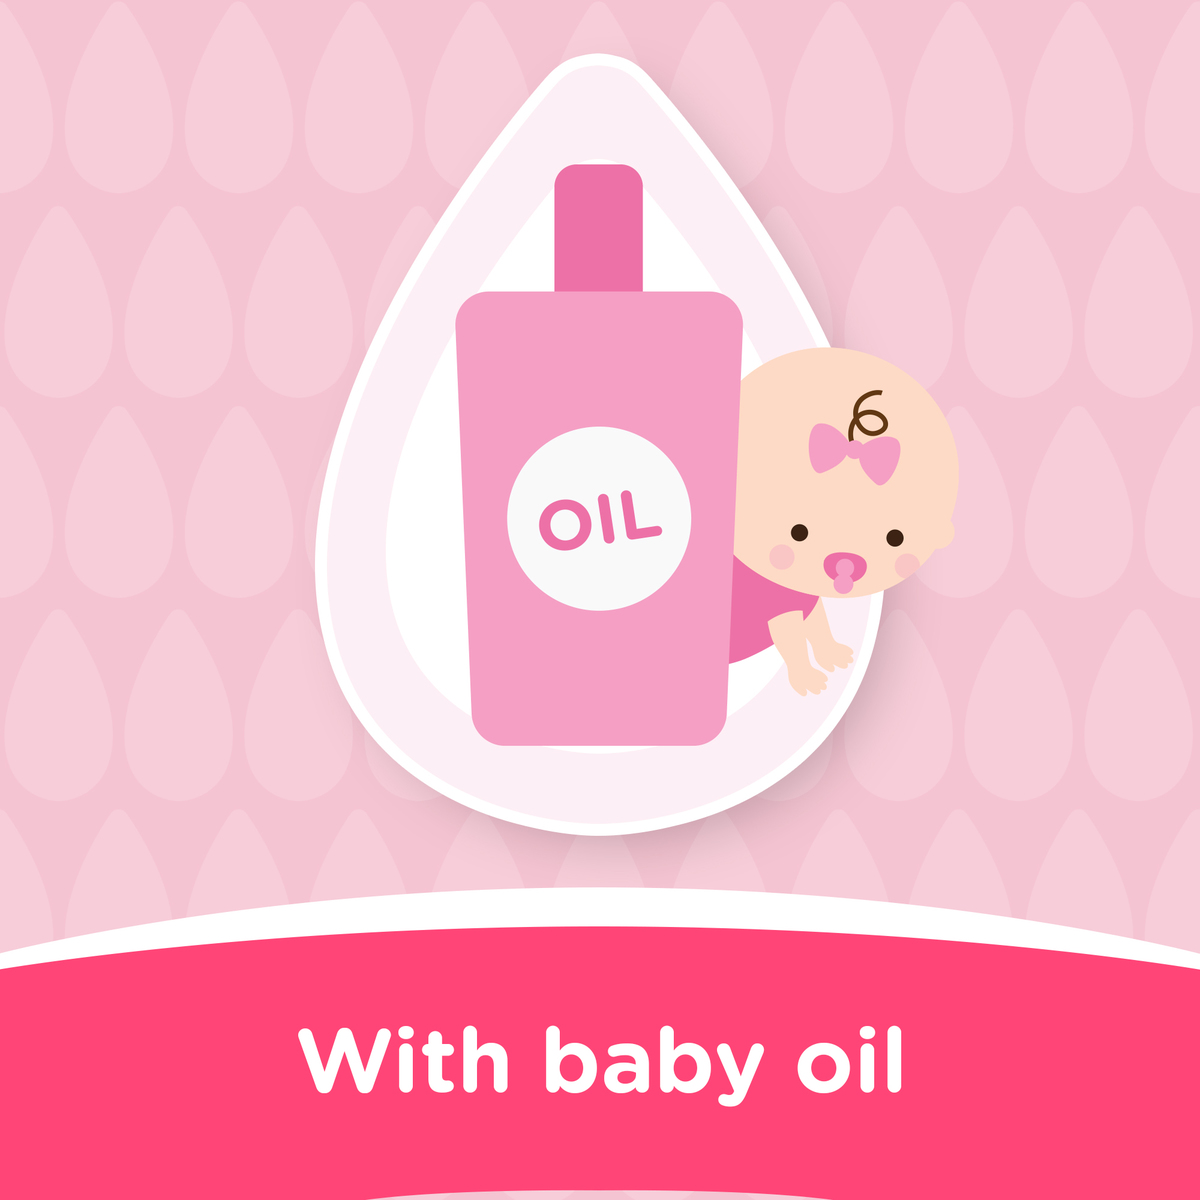 Johnson's Baby Soap with Baby Oil 125 g